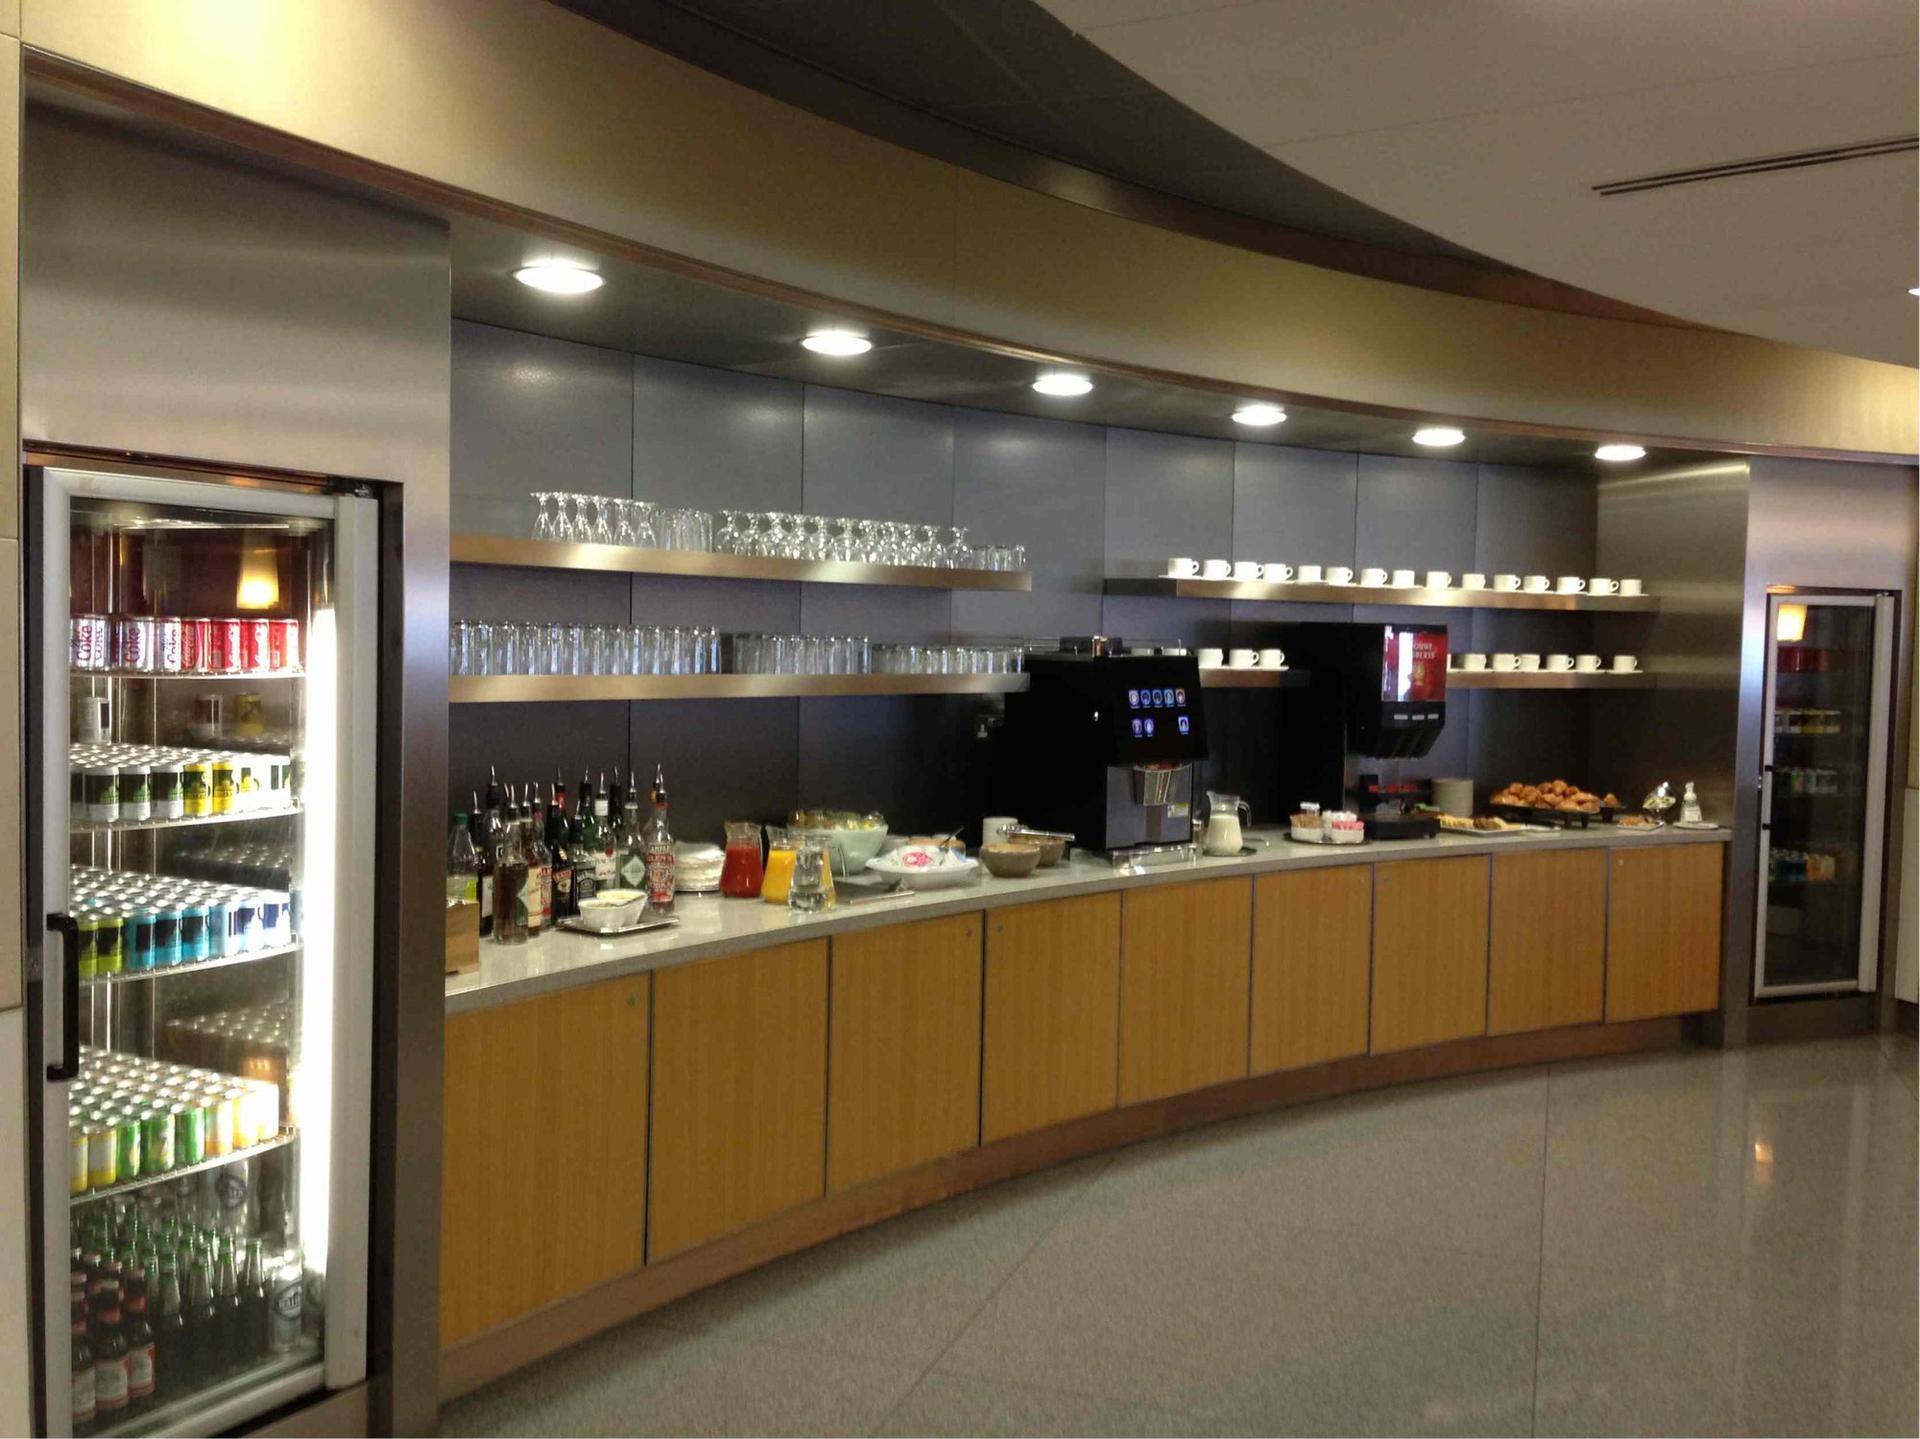 American Airlines Admirals Club image 2 of 38